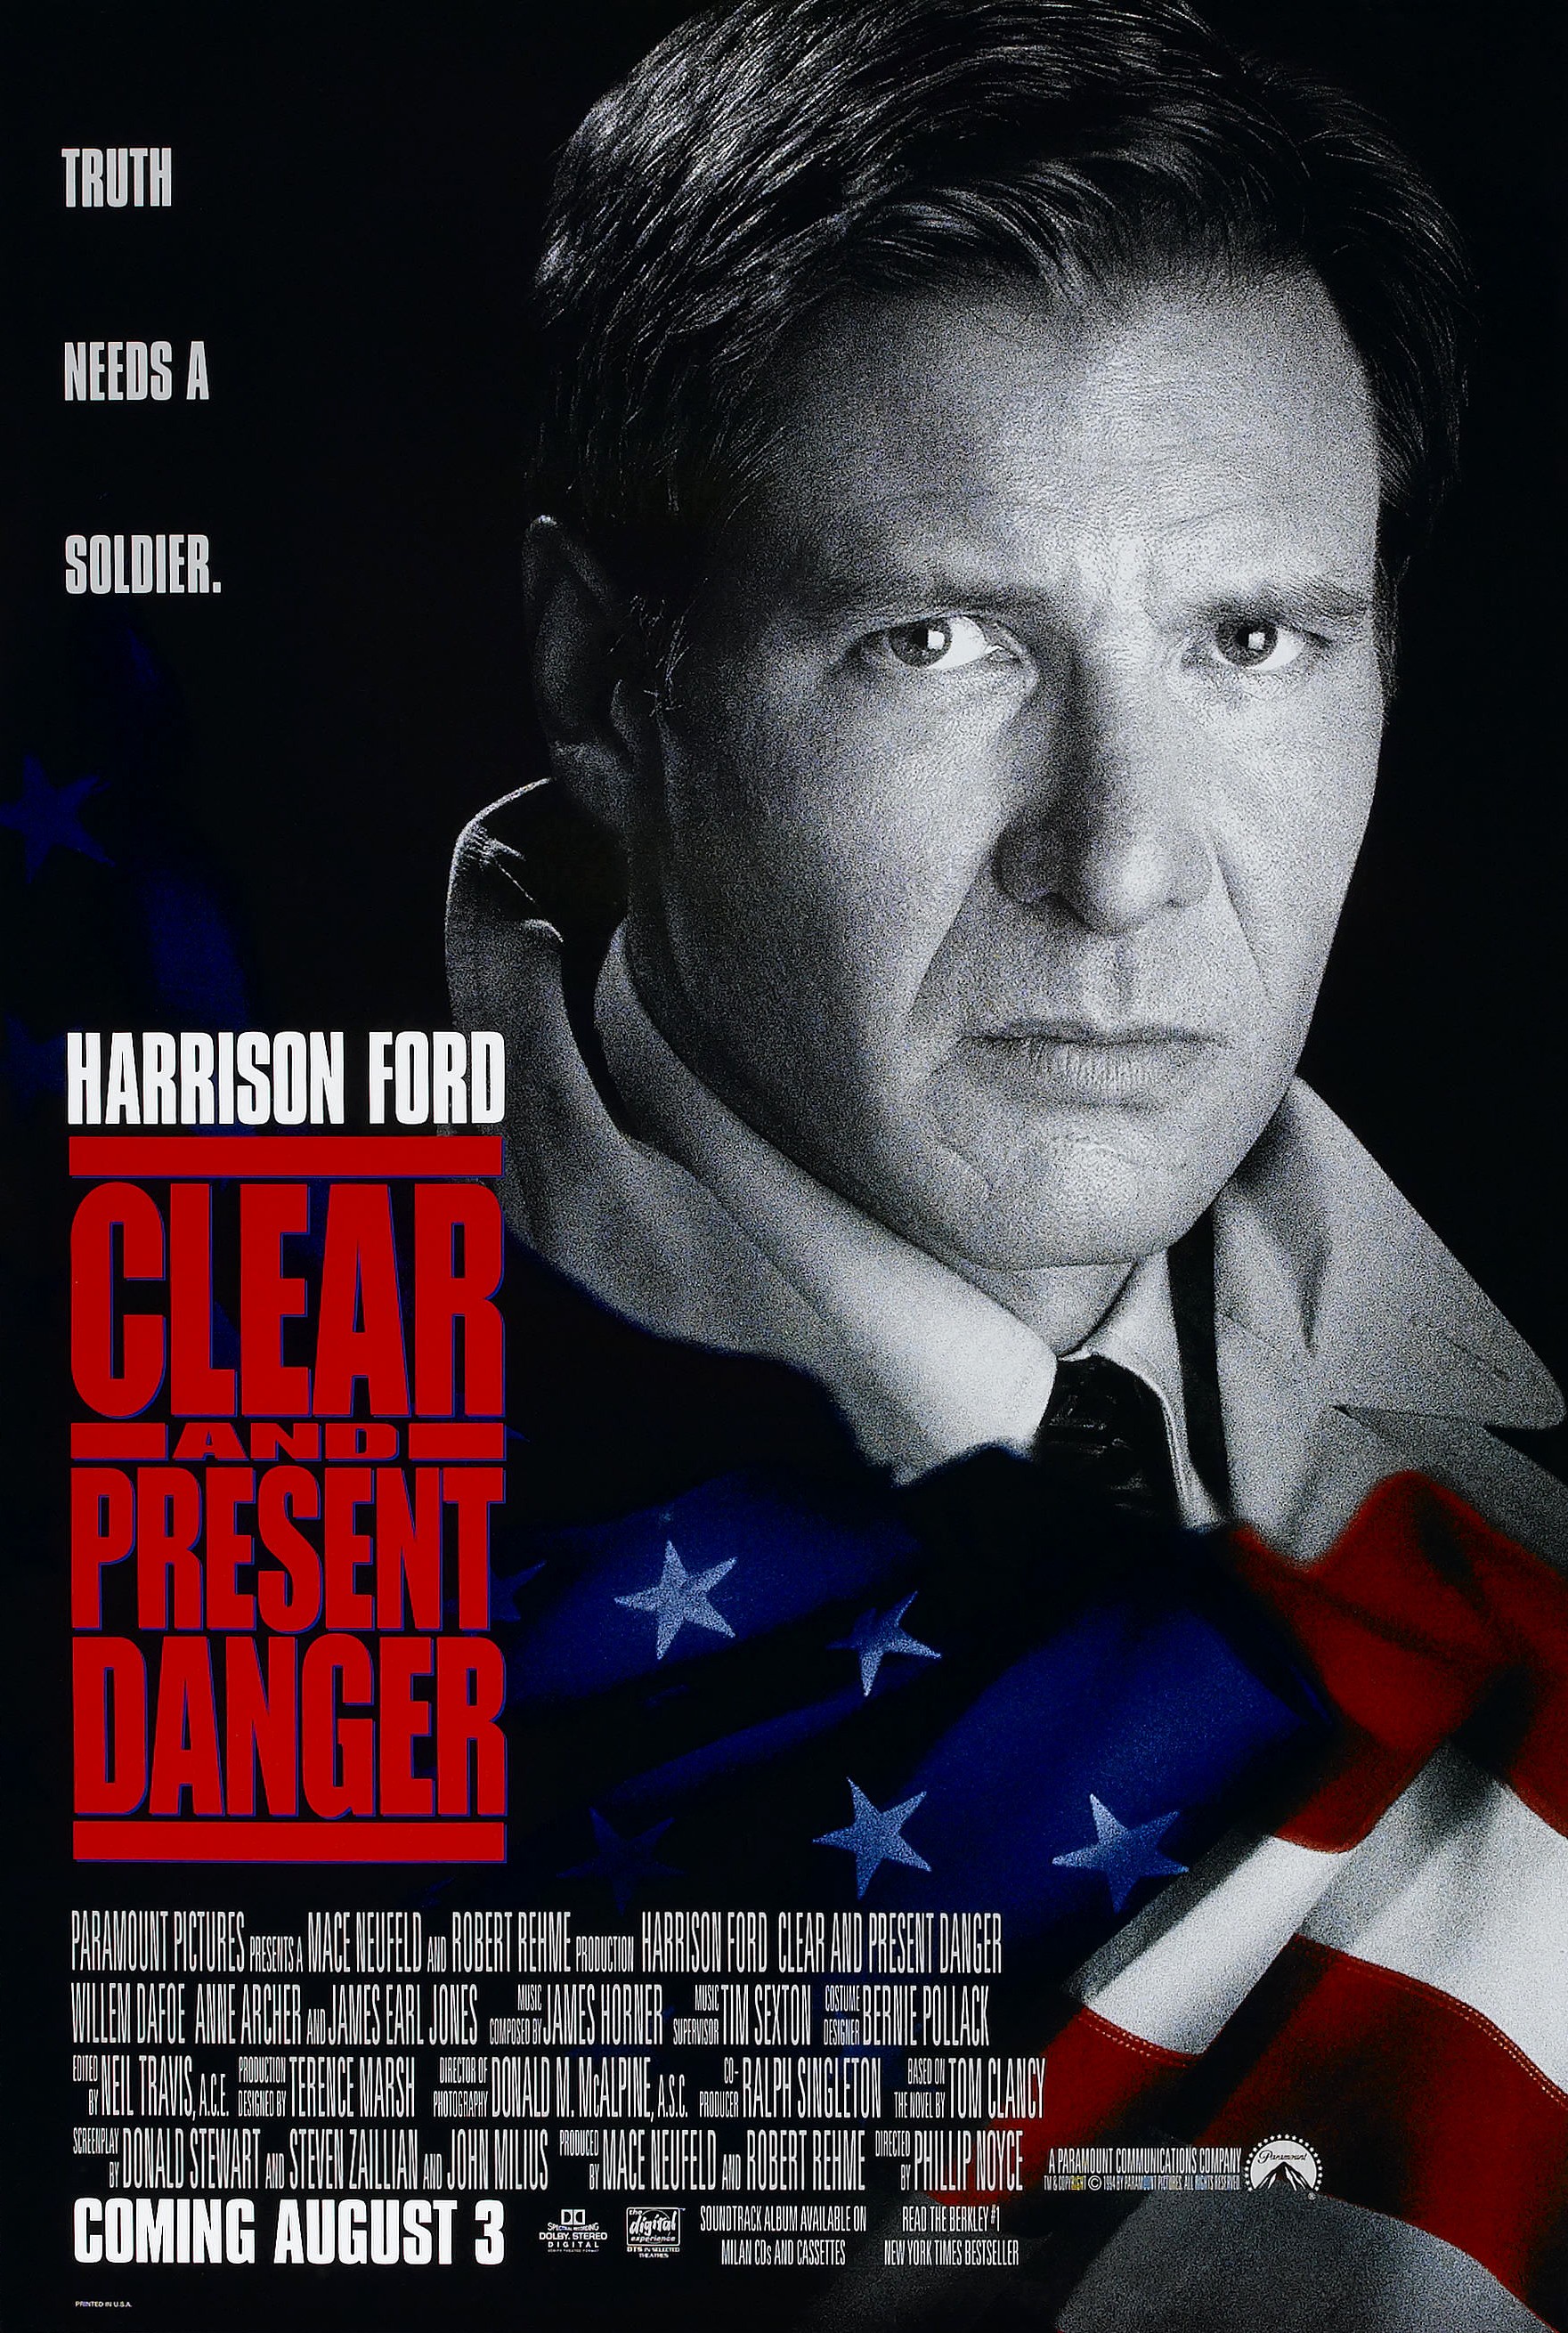 Amazoncom: Clear and Present Danger Blu-ray: Harrison